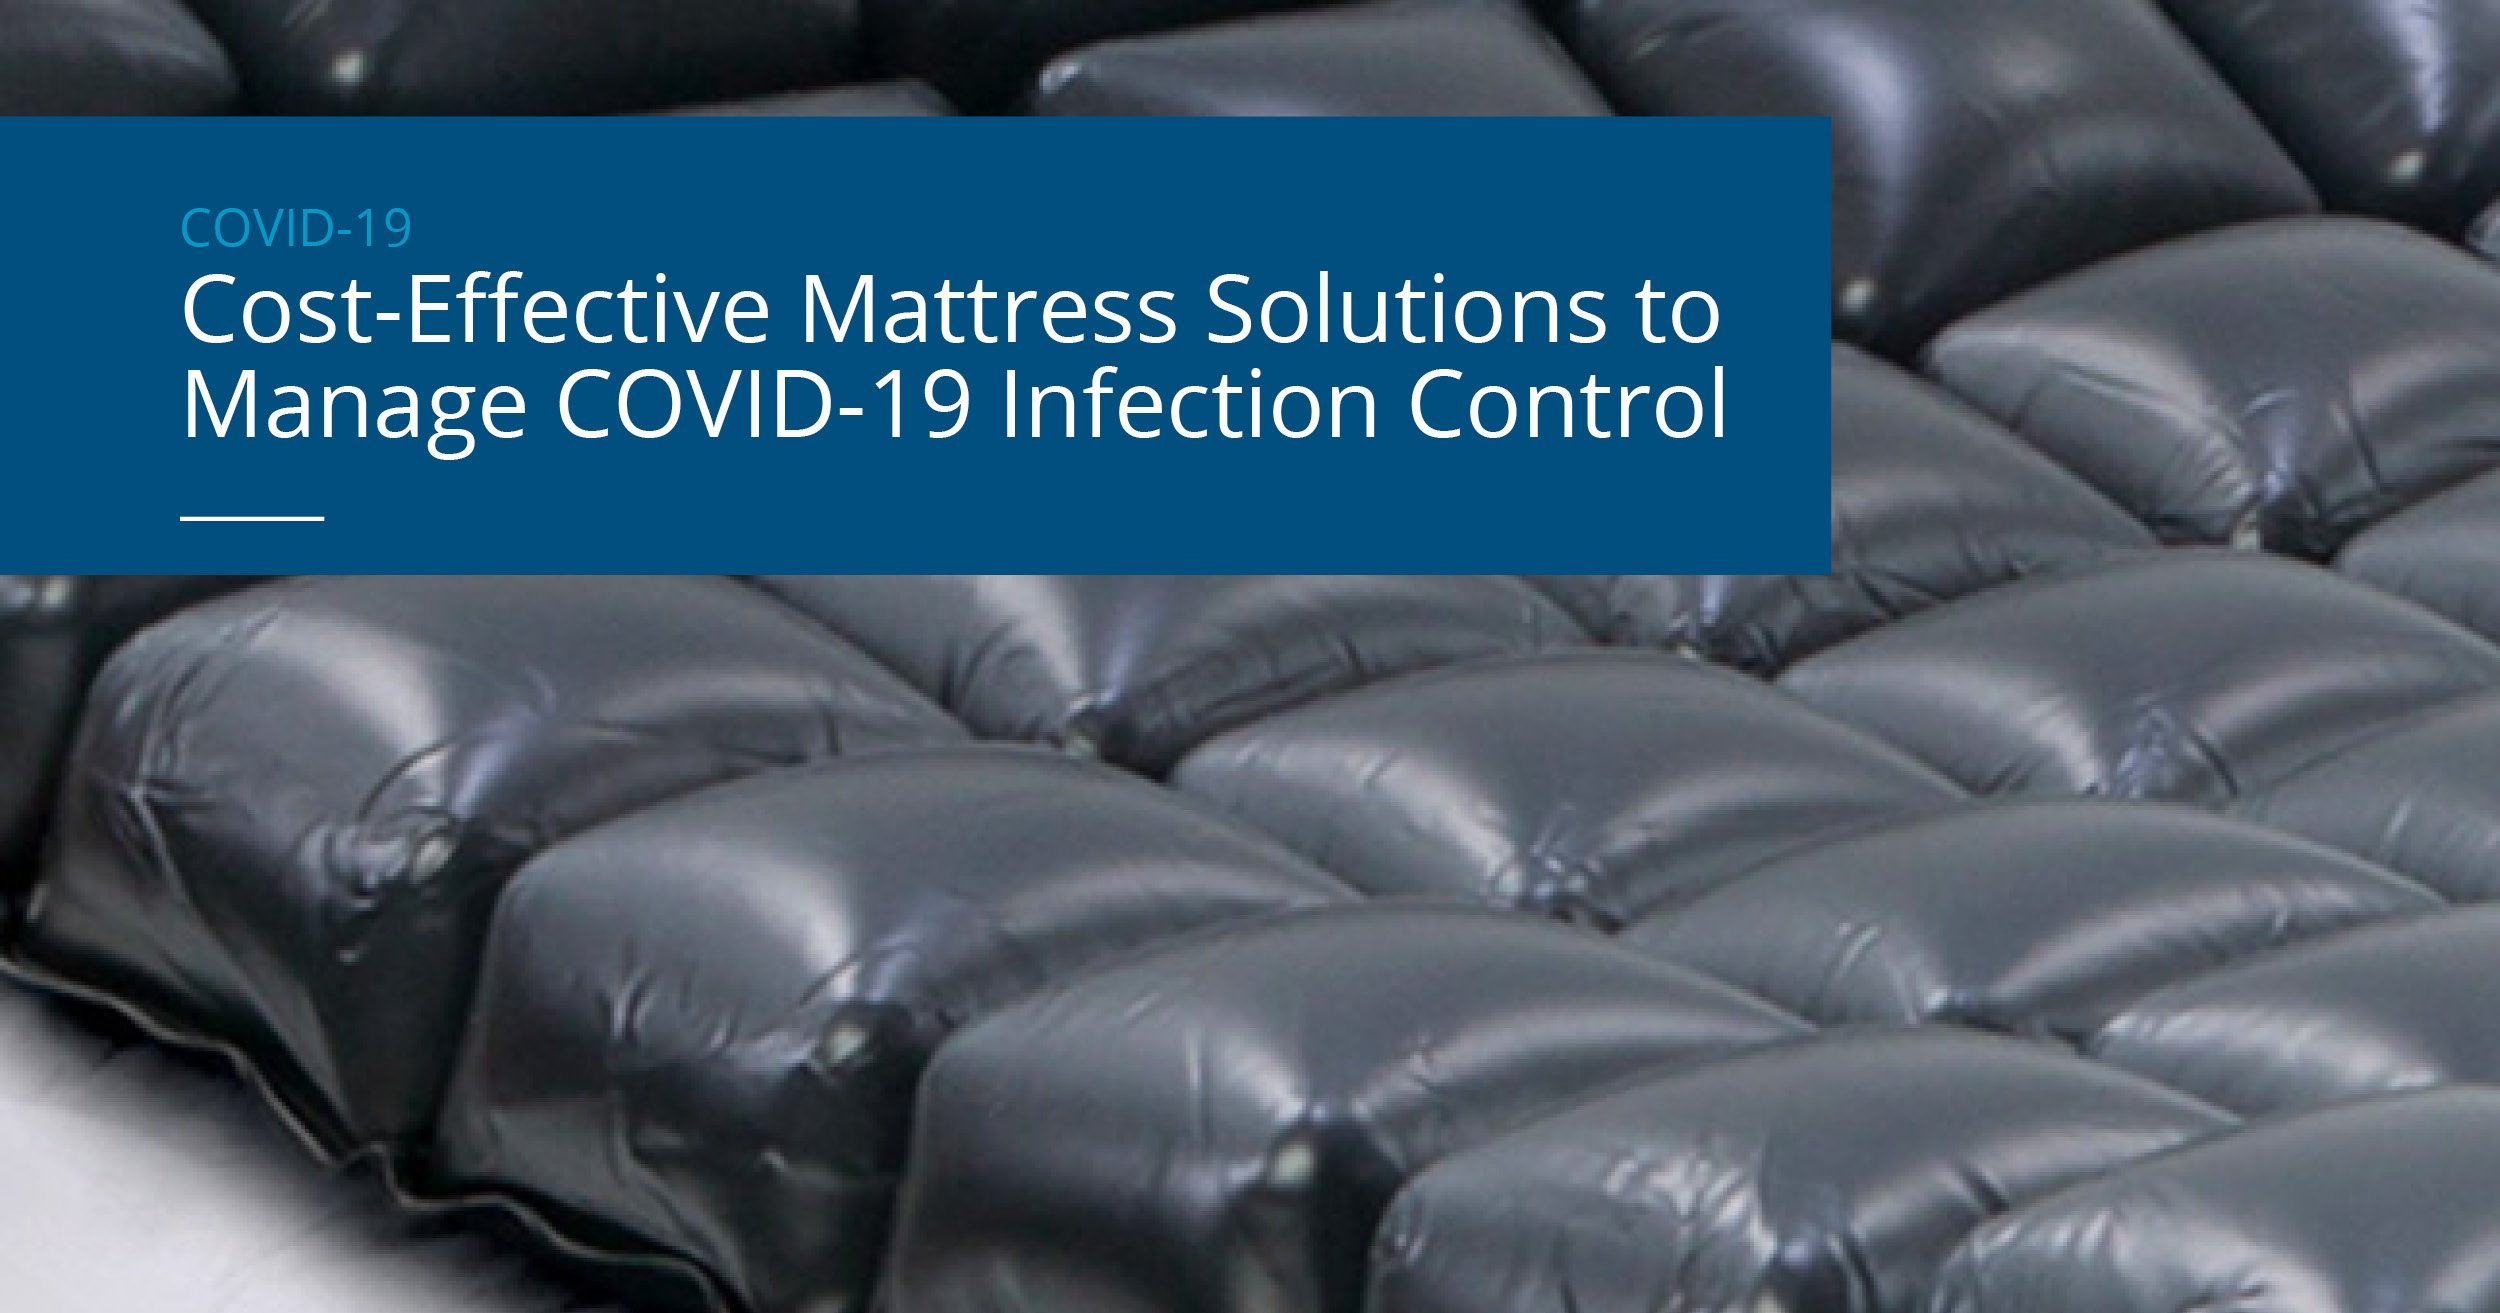 Cost-Effective Mattress Solutions to Manage COVID-19 Infection Control